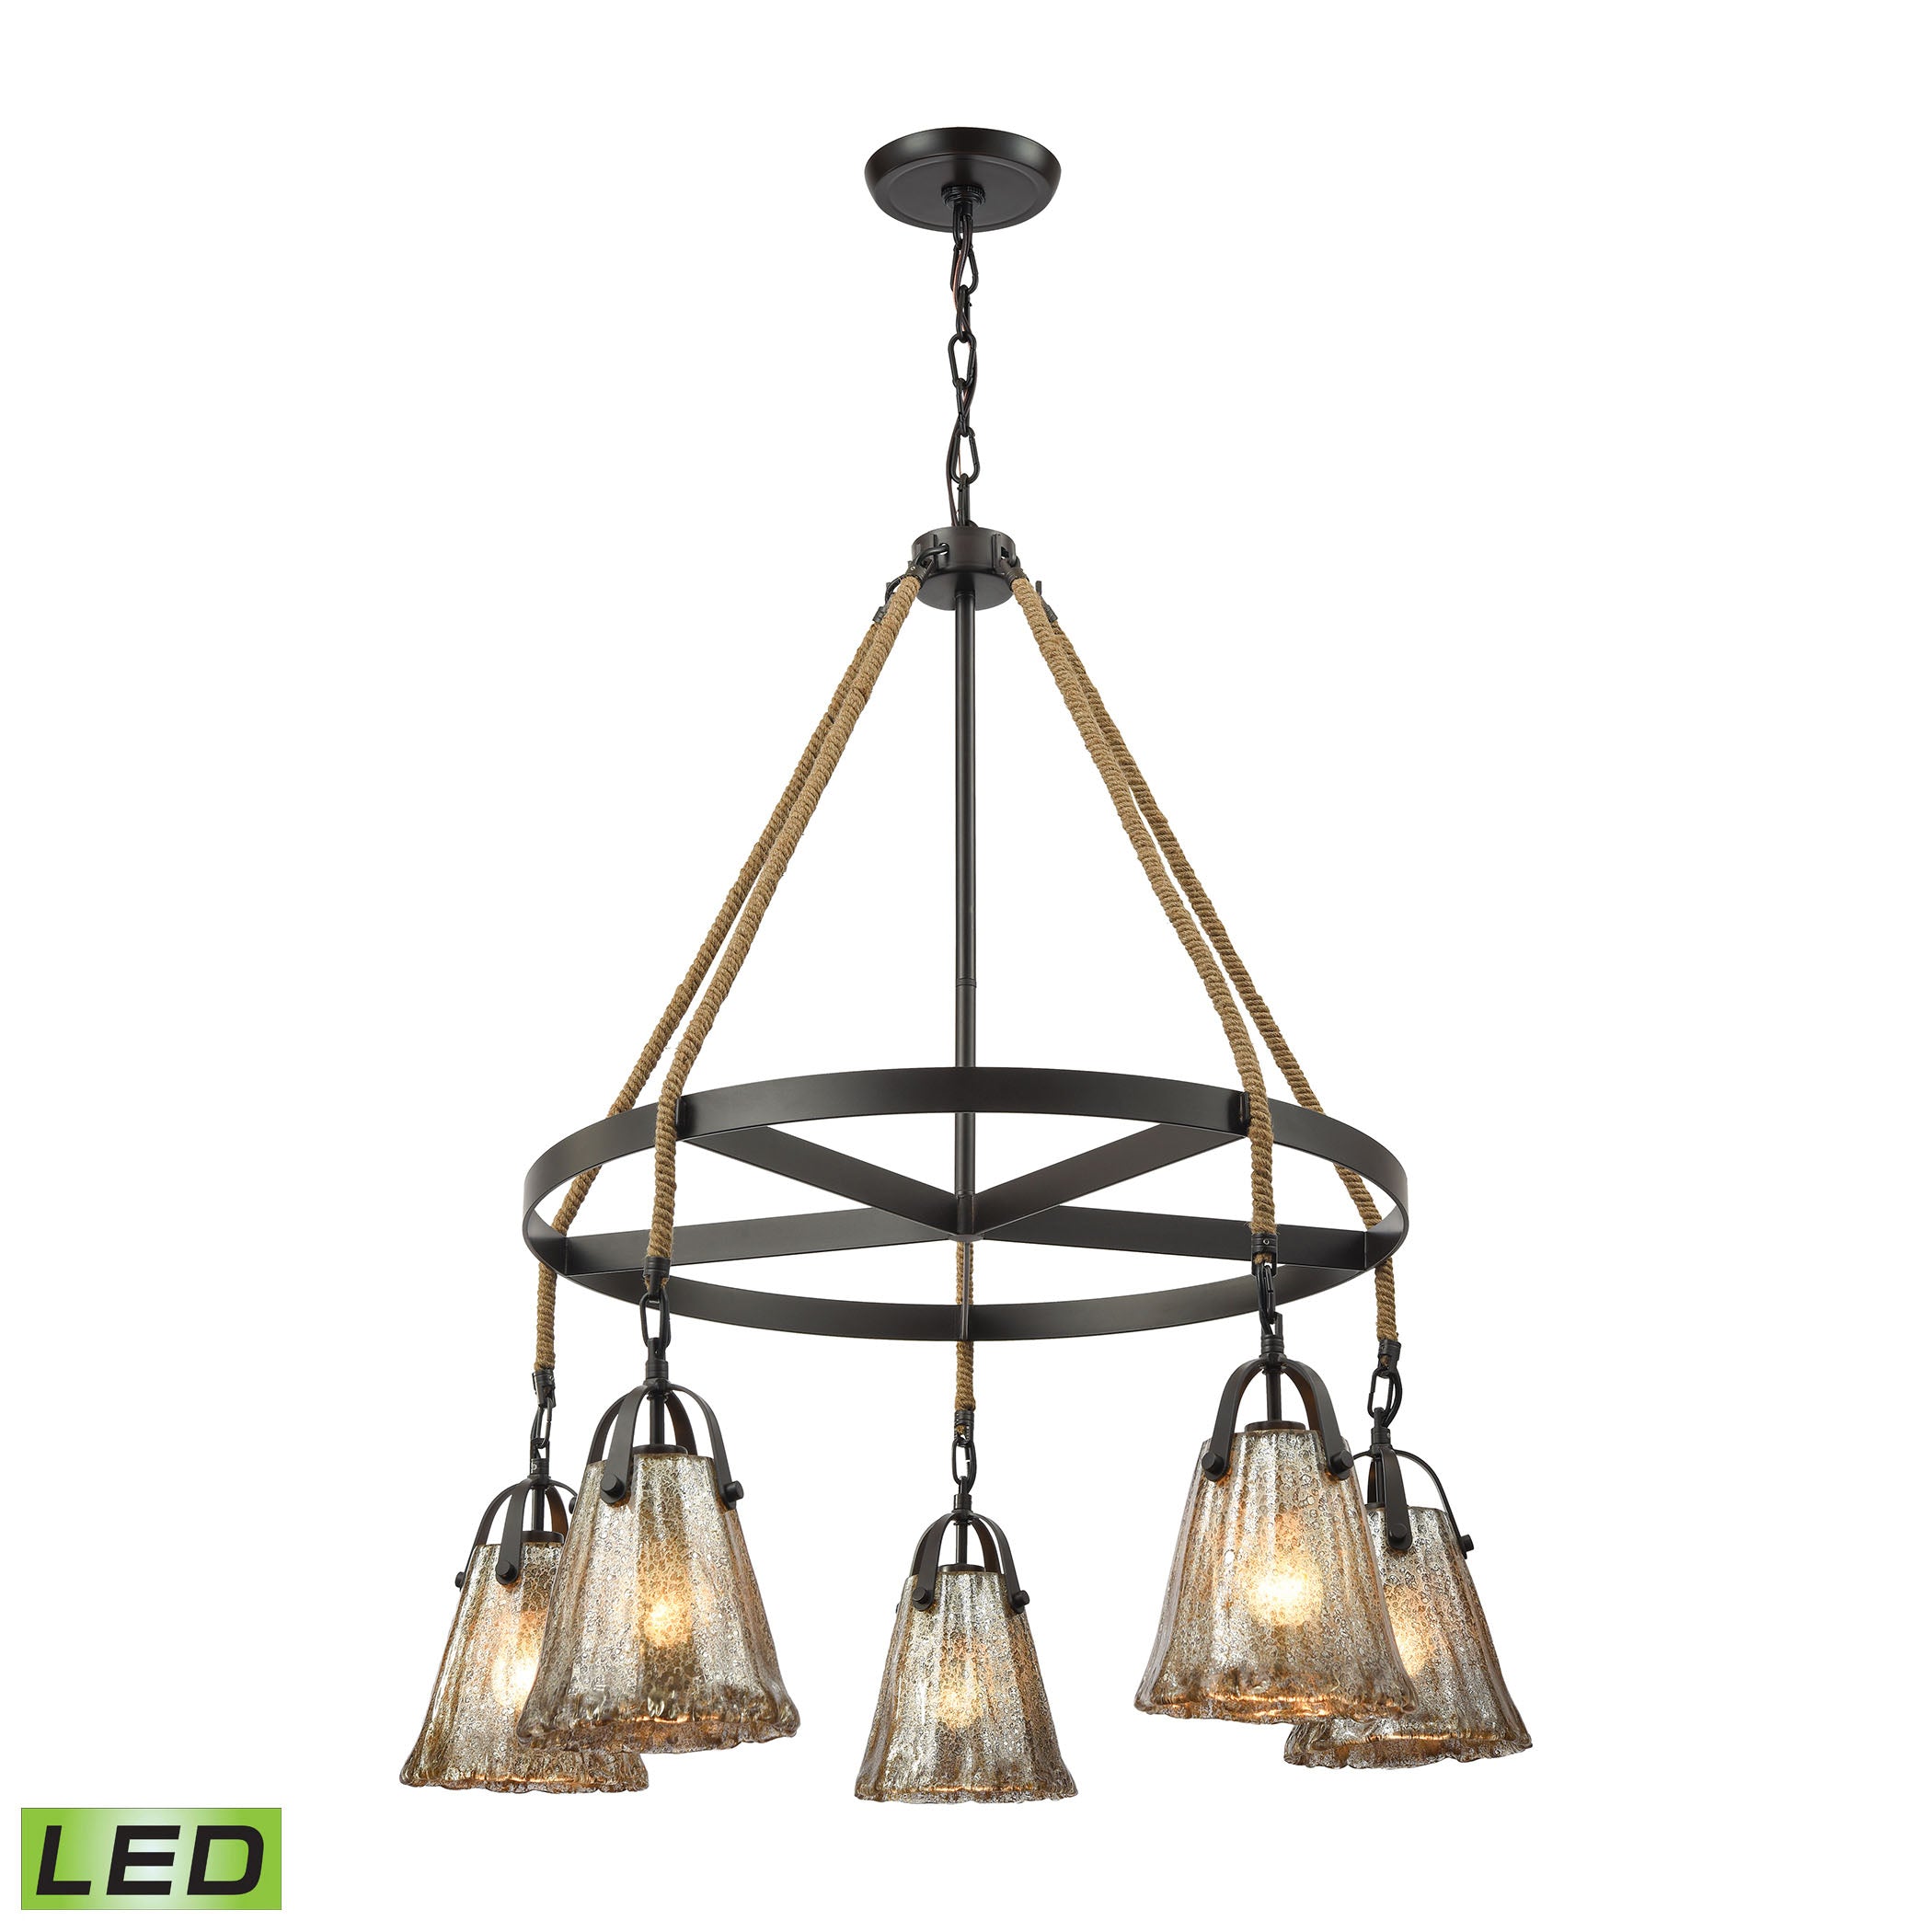 ELK Lighting 10631/5CH-LED Hand Formed Glass 5-Light Chandelier in Oiled Bronze with Mercury Glass - Includes LED Bulbs